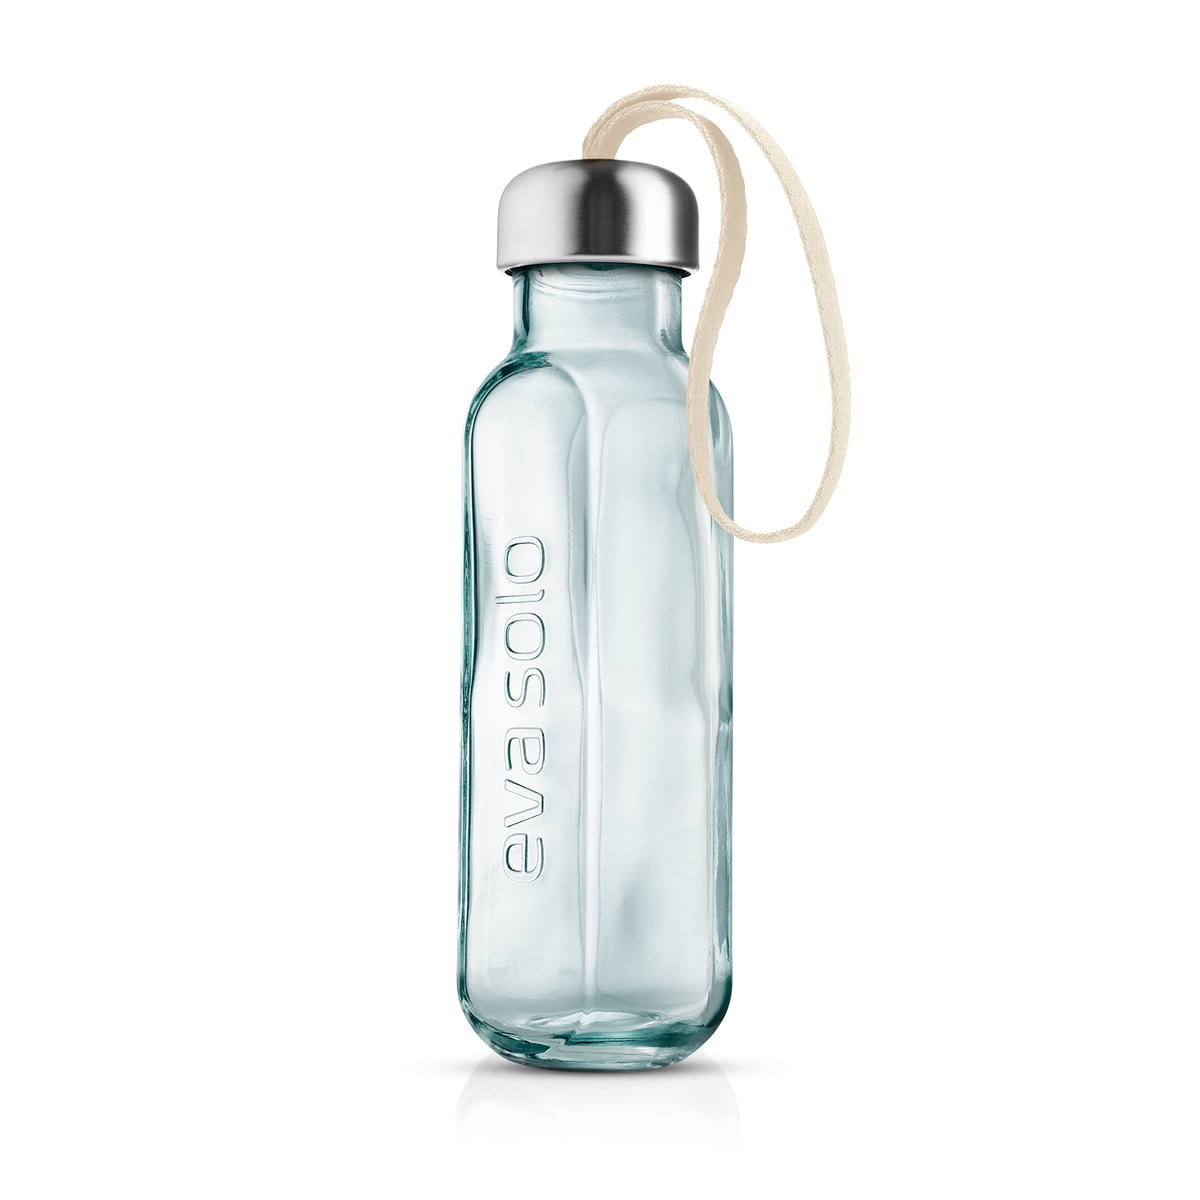 Eva Solo - Recycled glass bottle | Connox